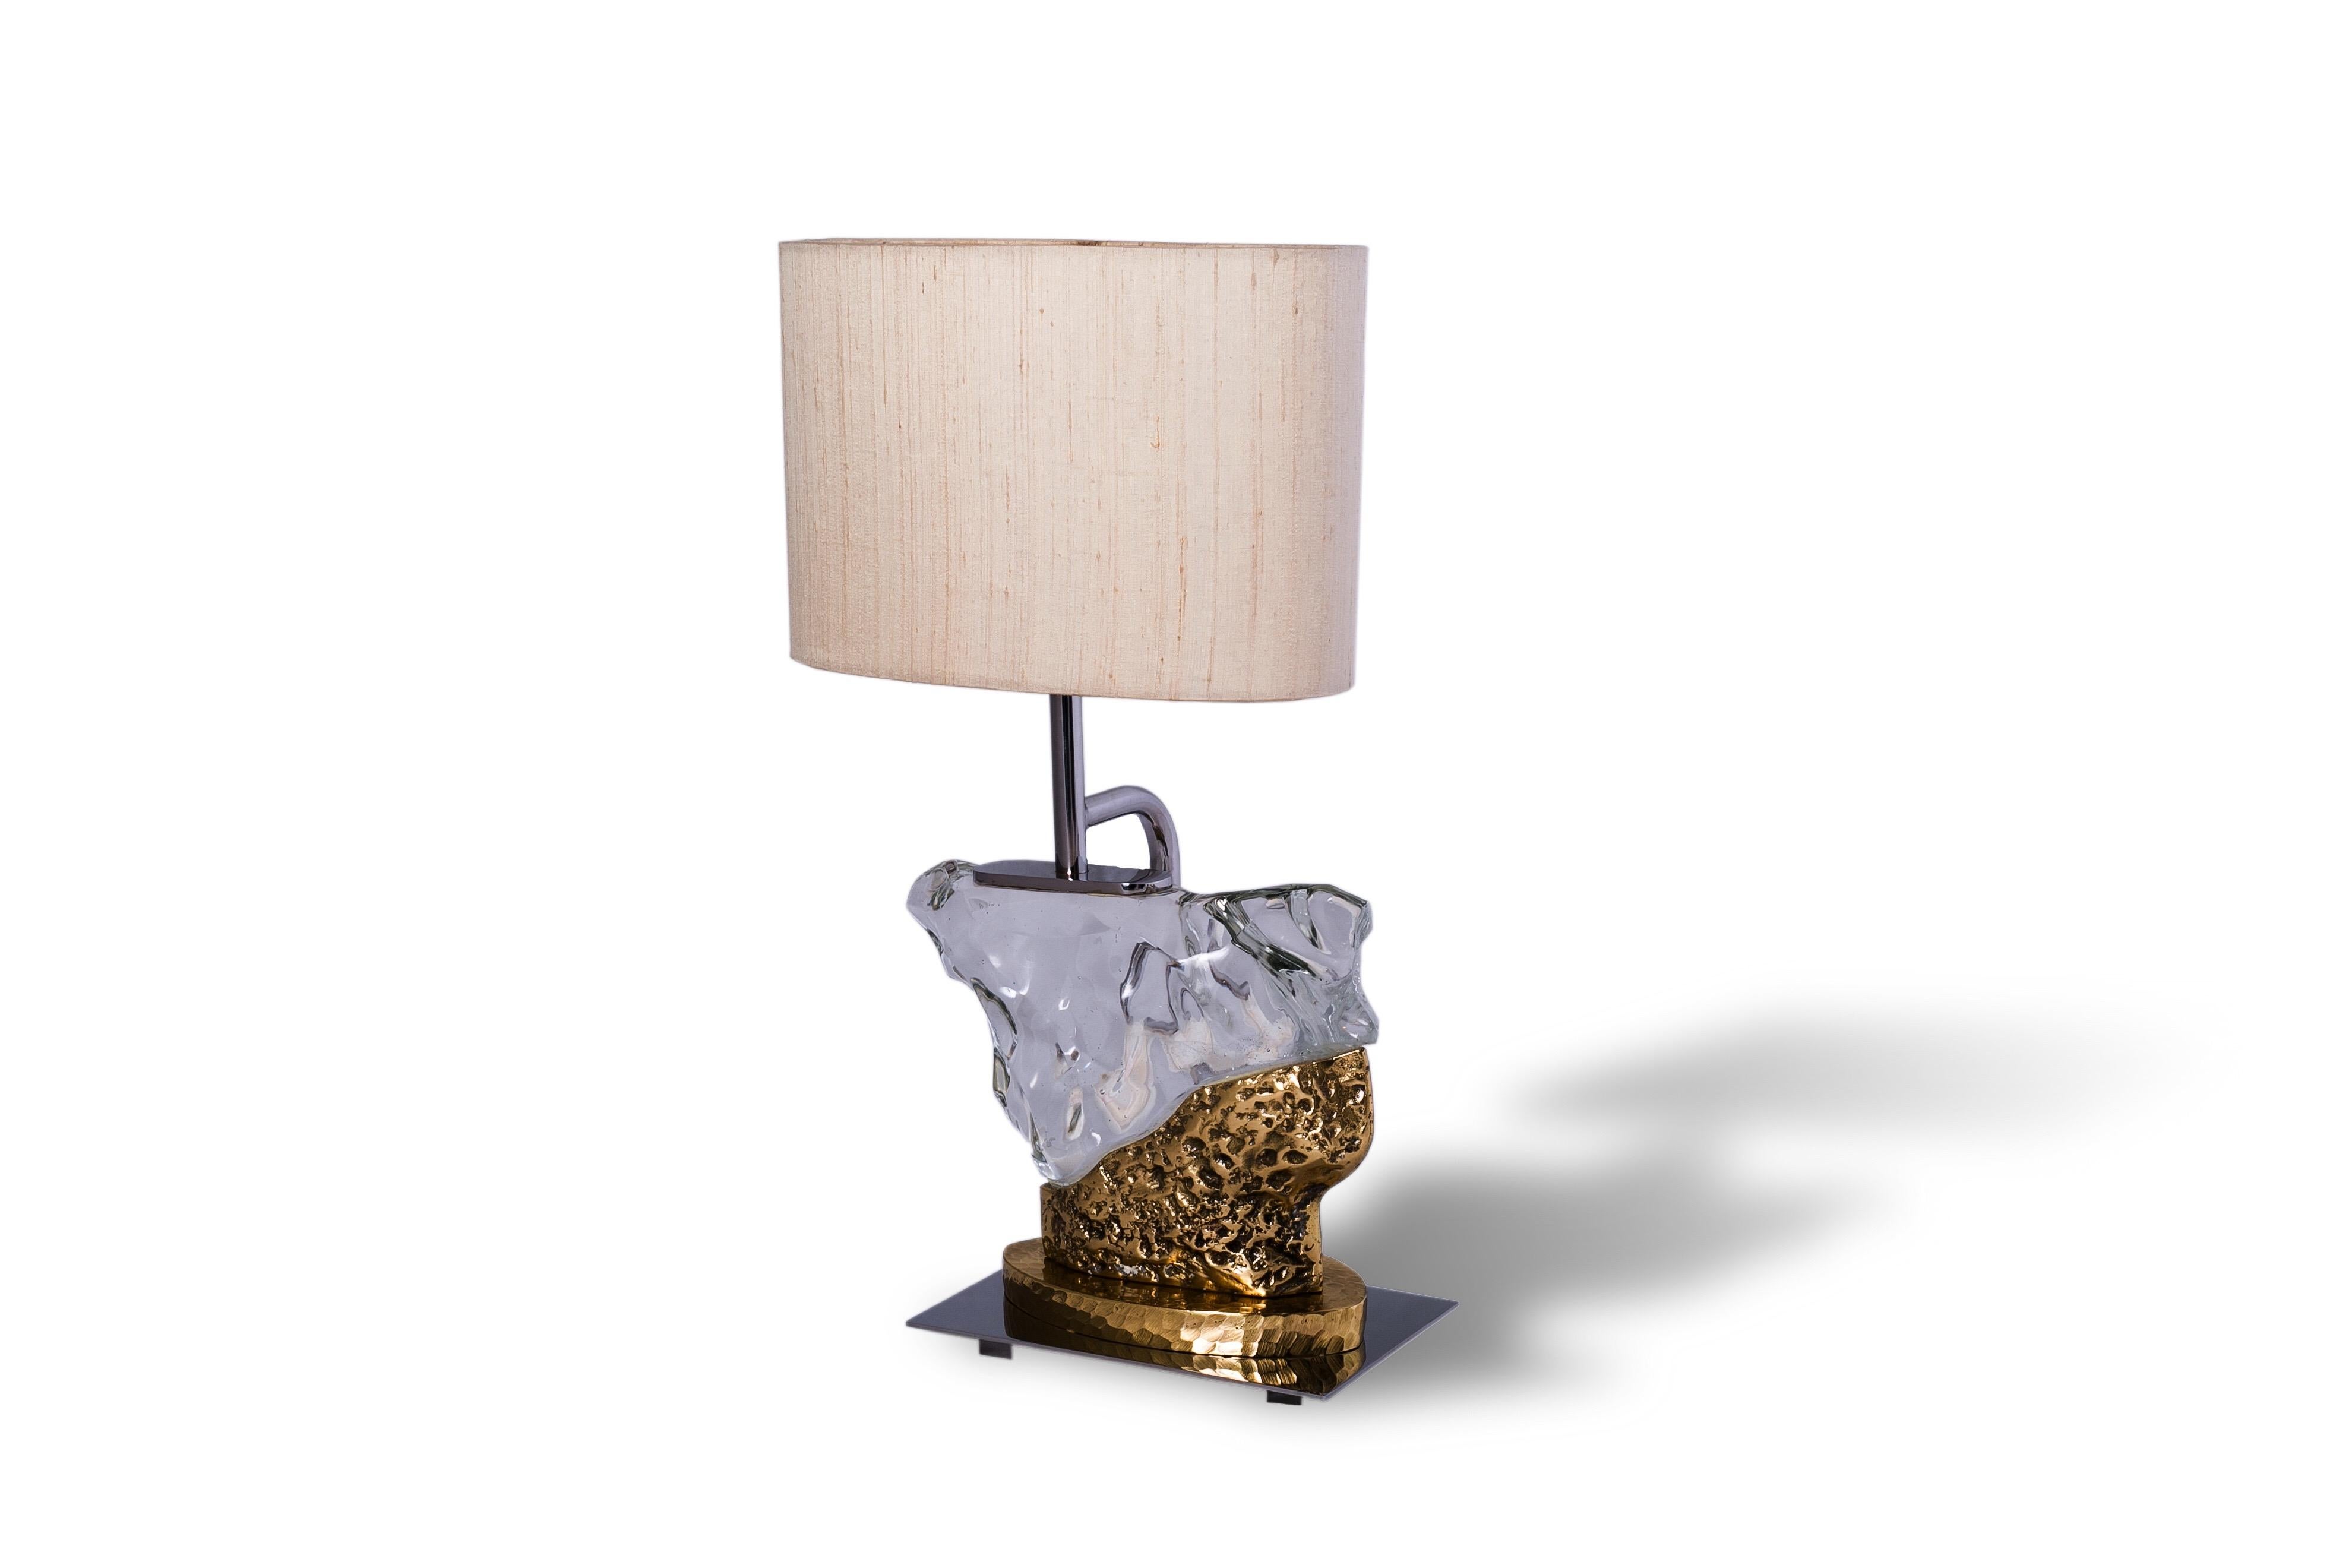 The Pacco table lamp presents itself as a couture modernist collectible for design aficionados. Inspired by the lunar surface and the concept of metamorphosis, these lighting pieces open an endless possibility for light compositions with impressive